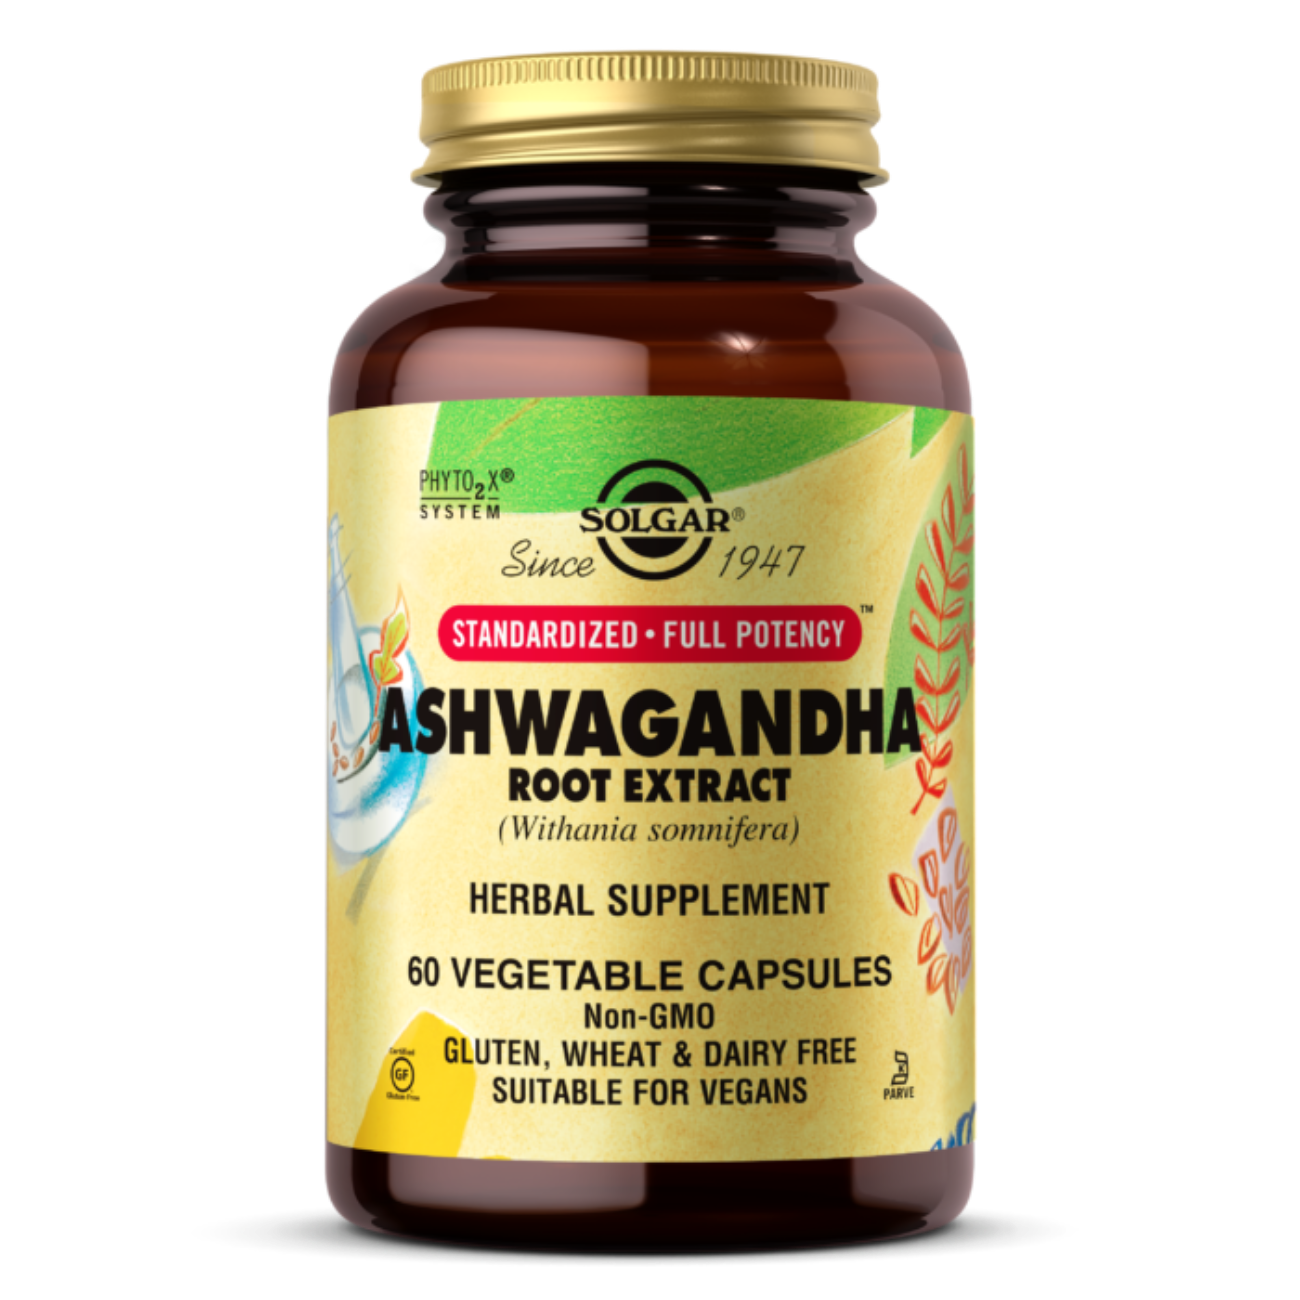 Ashwagandha Root Extract - 60 Vegetable Capsules